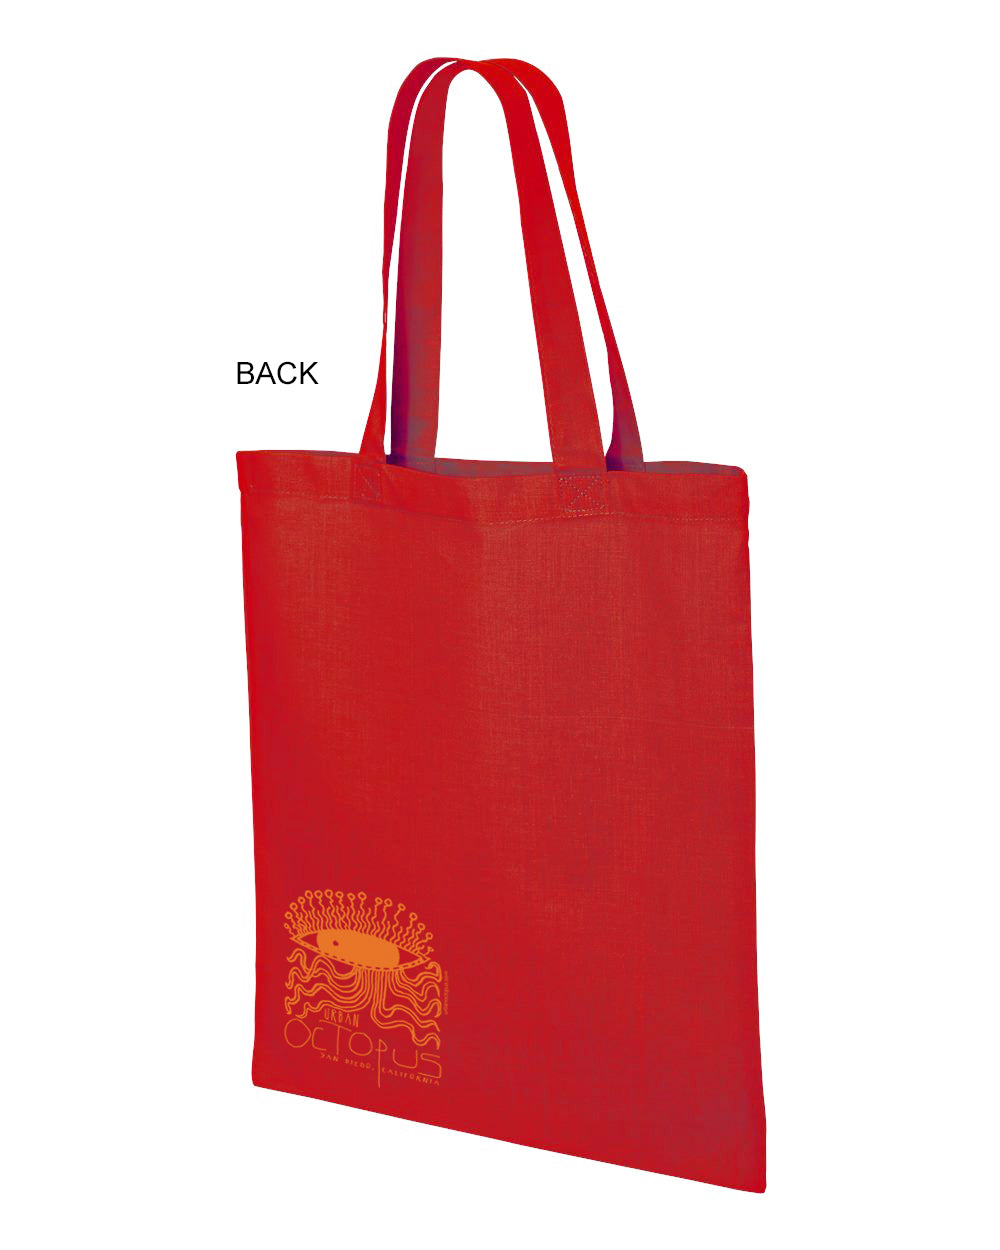 "The Great Machina" Tote canvas bag